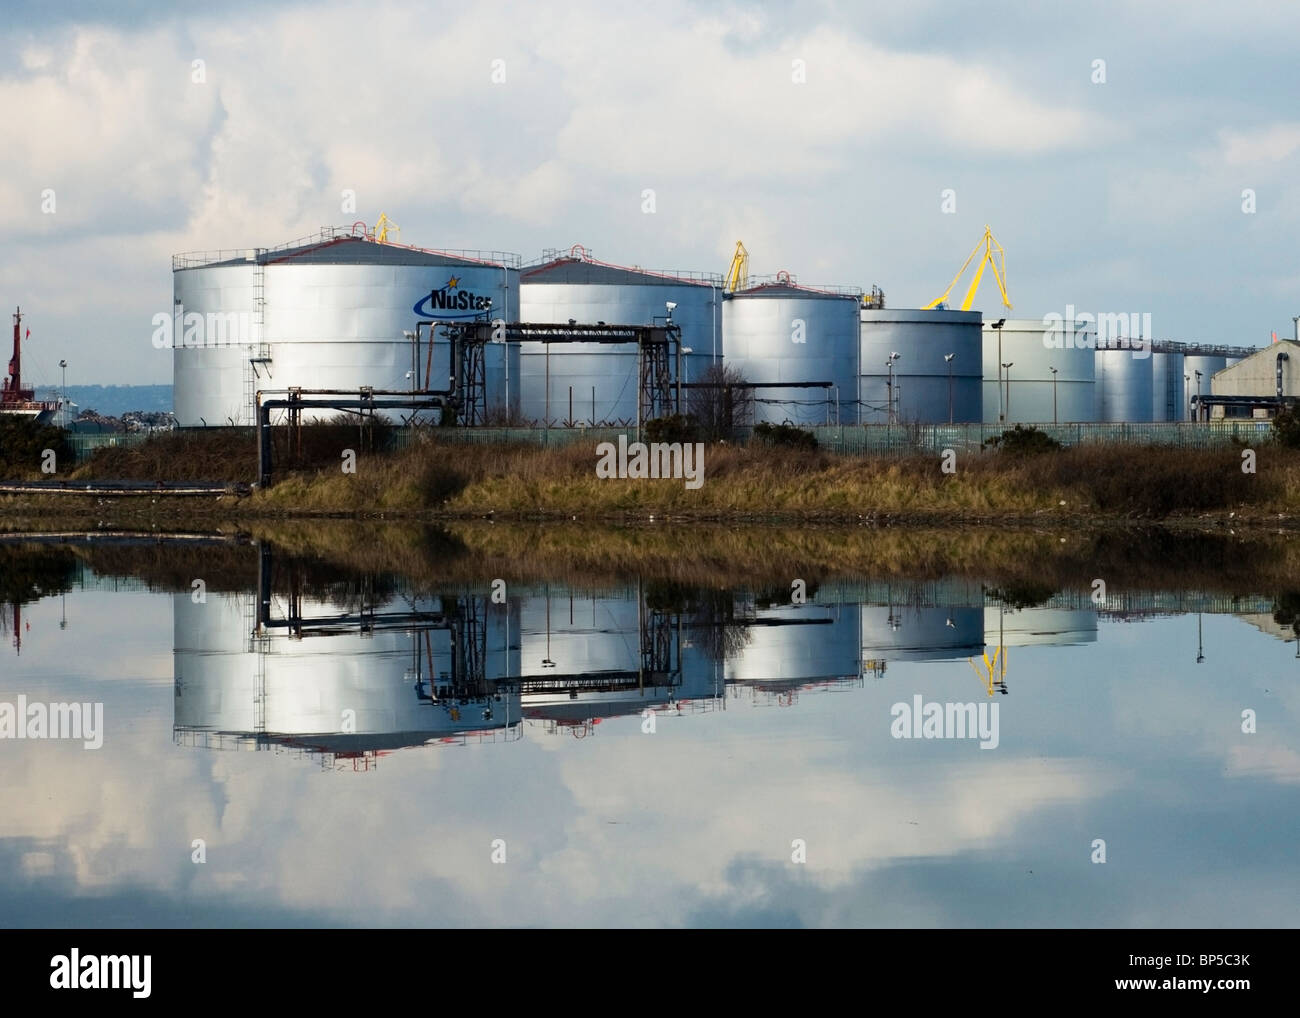 Nu Star Containers Reflecting in the Connswater River, Victoria Park. Stock Photo